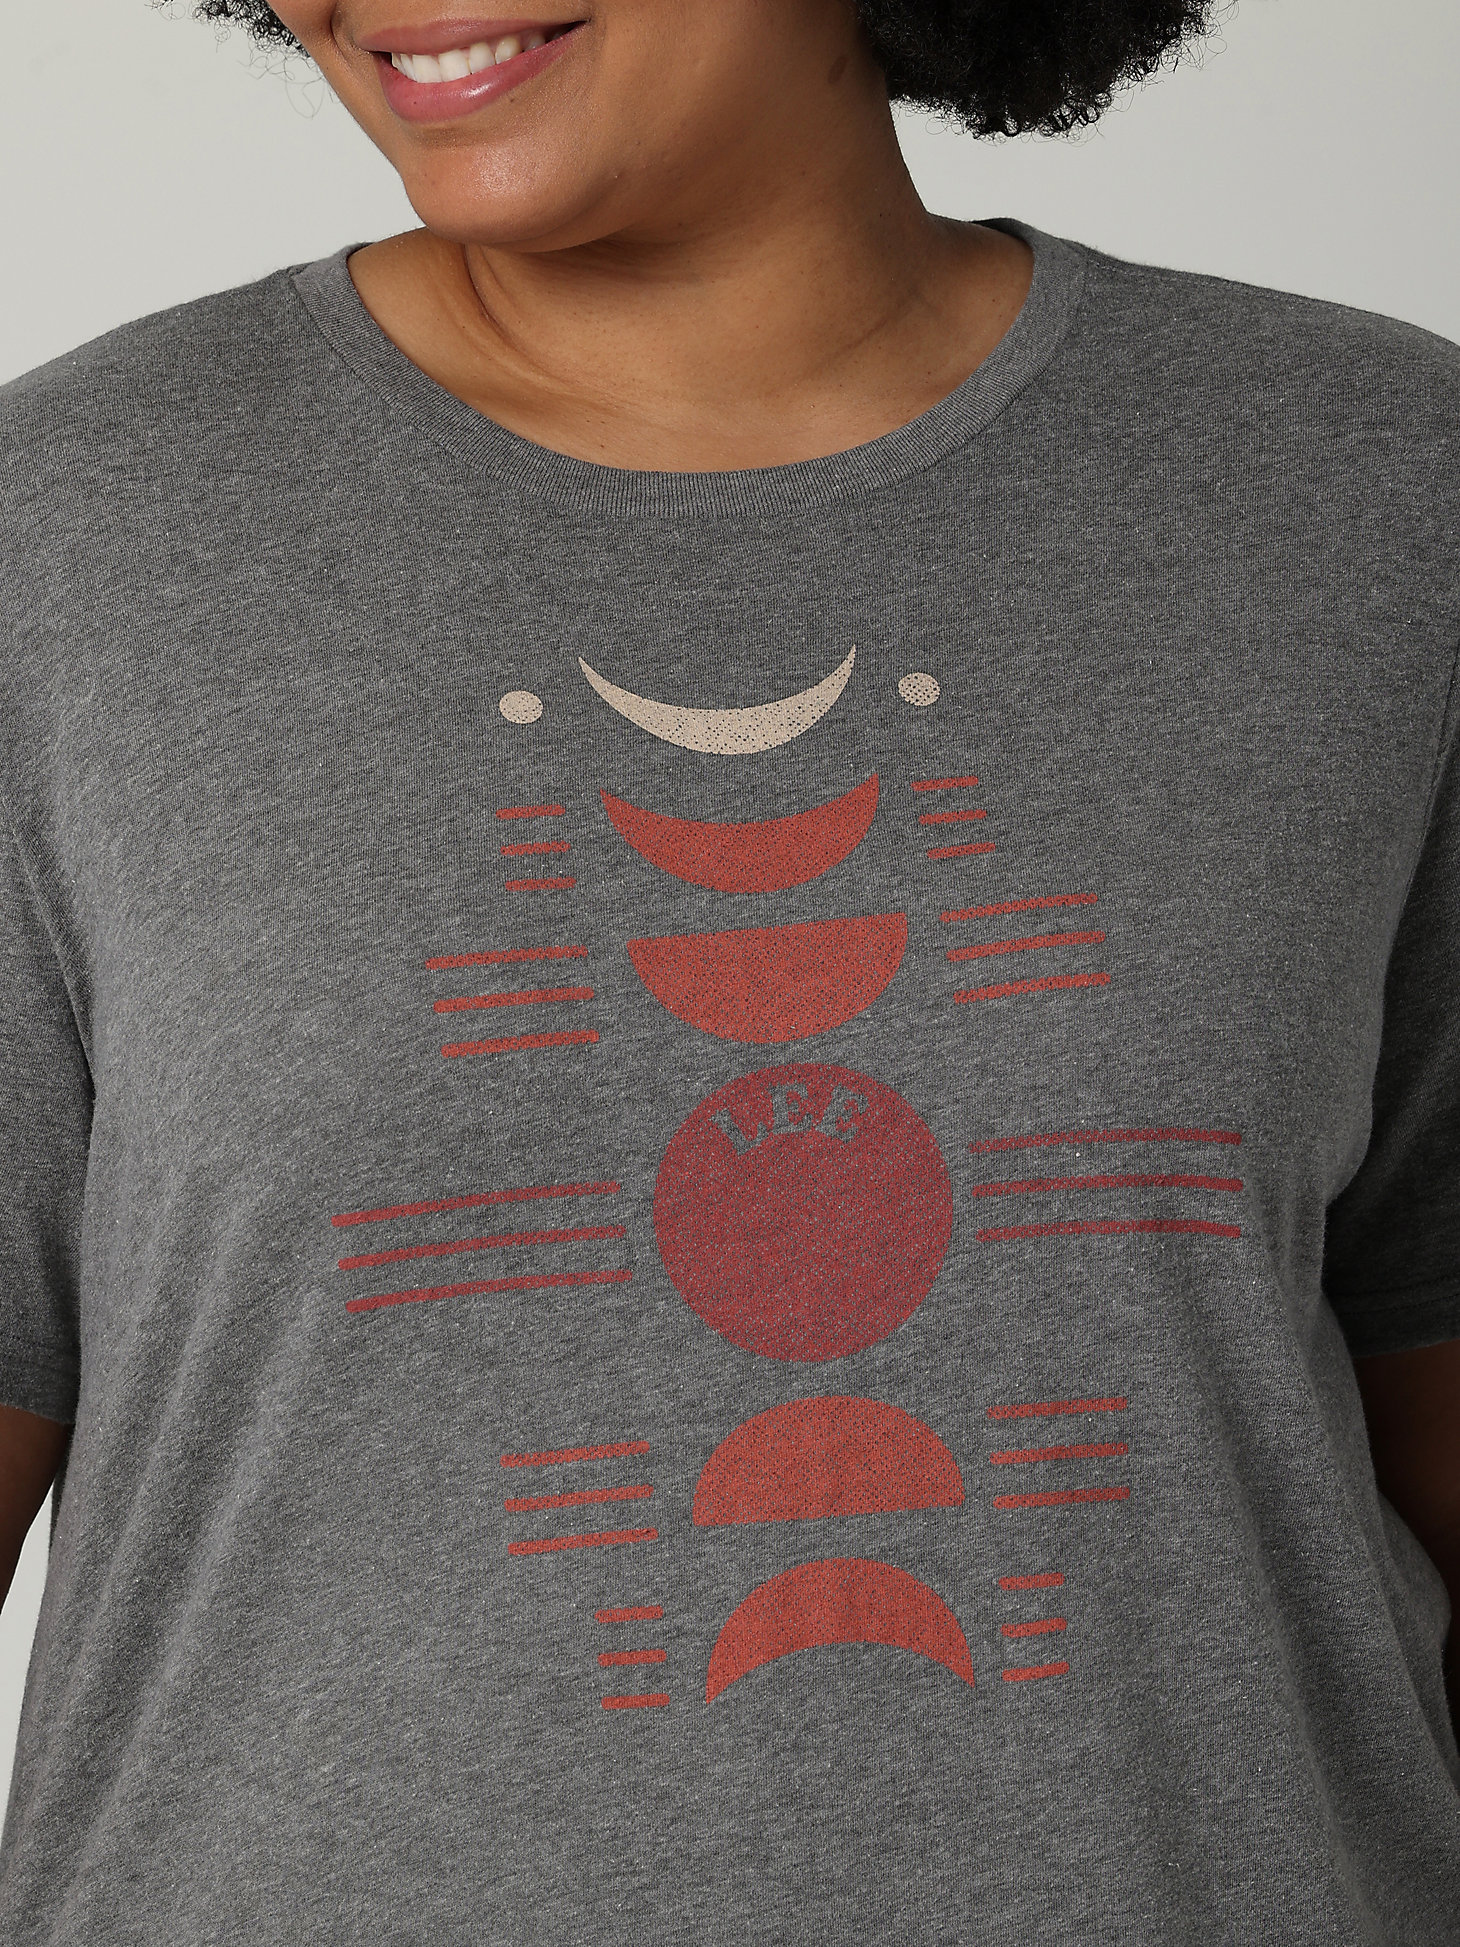 Women's Moon Phases Graphic Tee (Plus) in Graphite alternative view 2